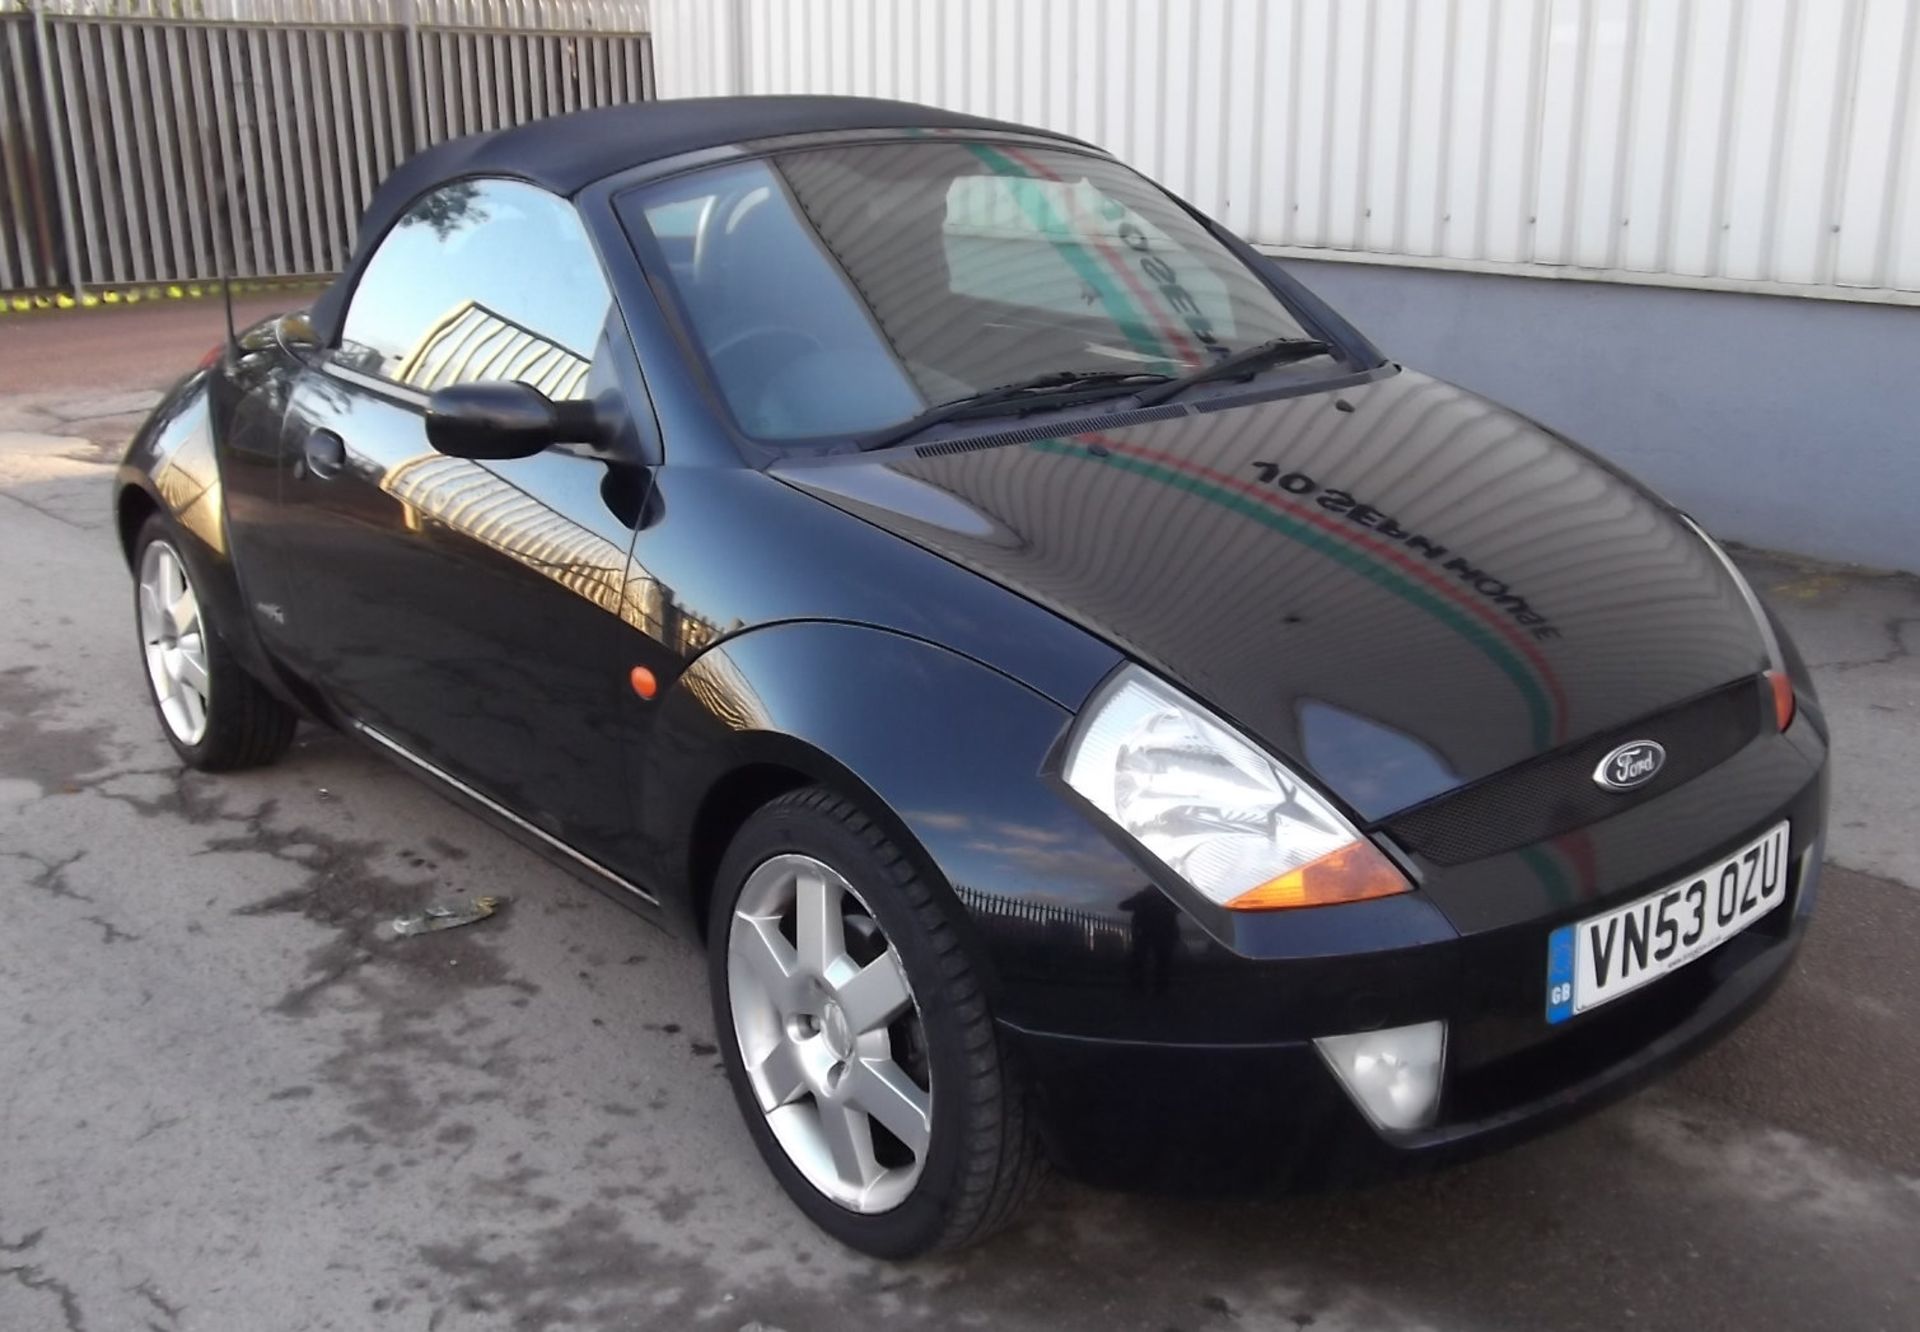 2003 Ford StreetKa 1.6 2 Door Convertible - CL505 - NO VAT ON THE HAMMER - Location: Corby, Northamp